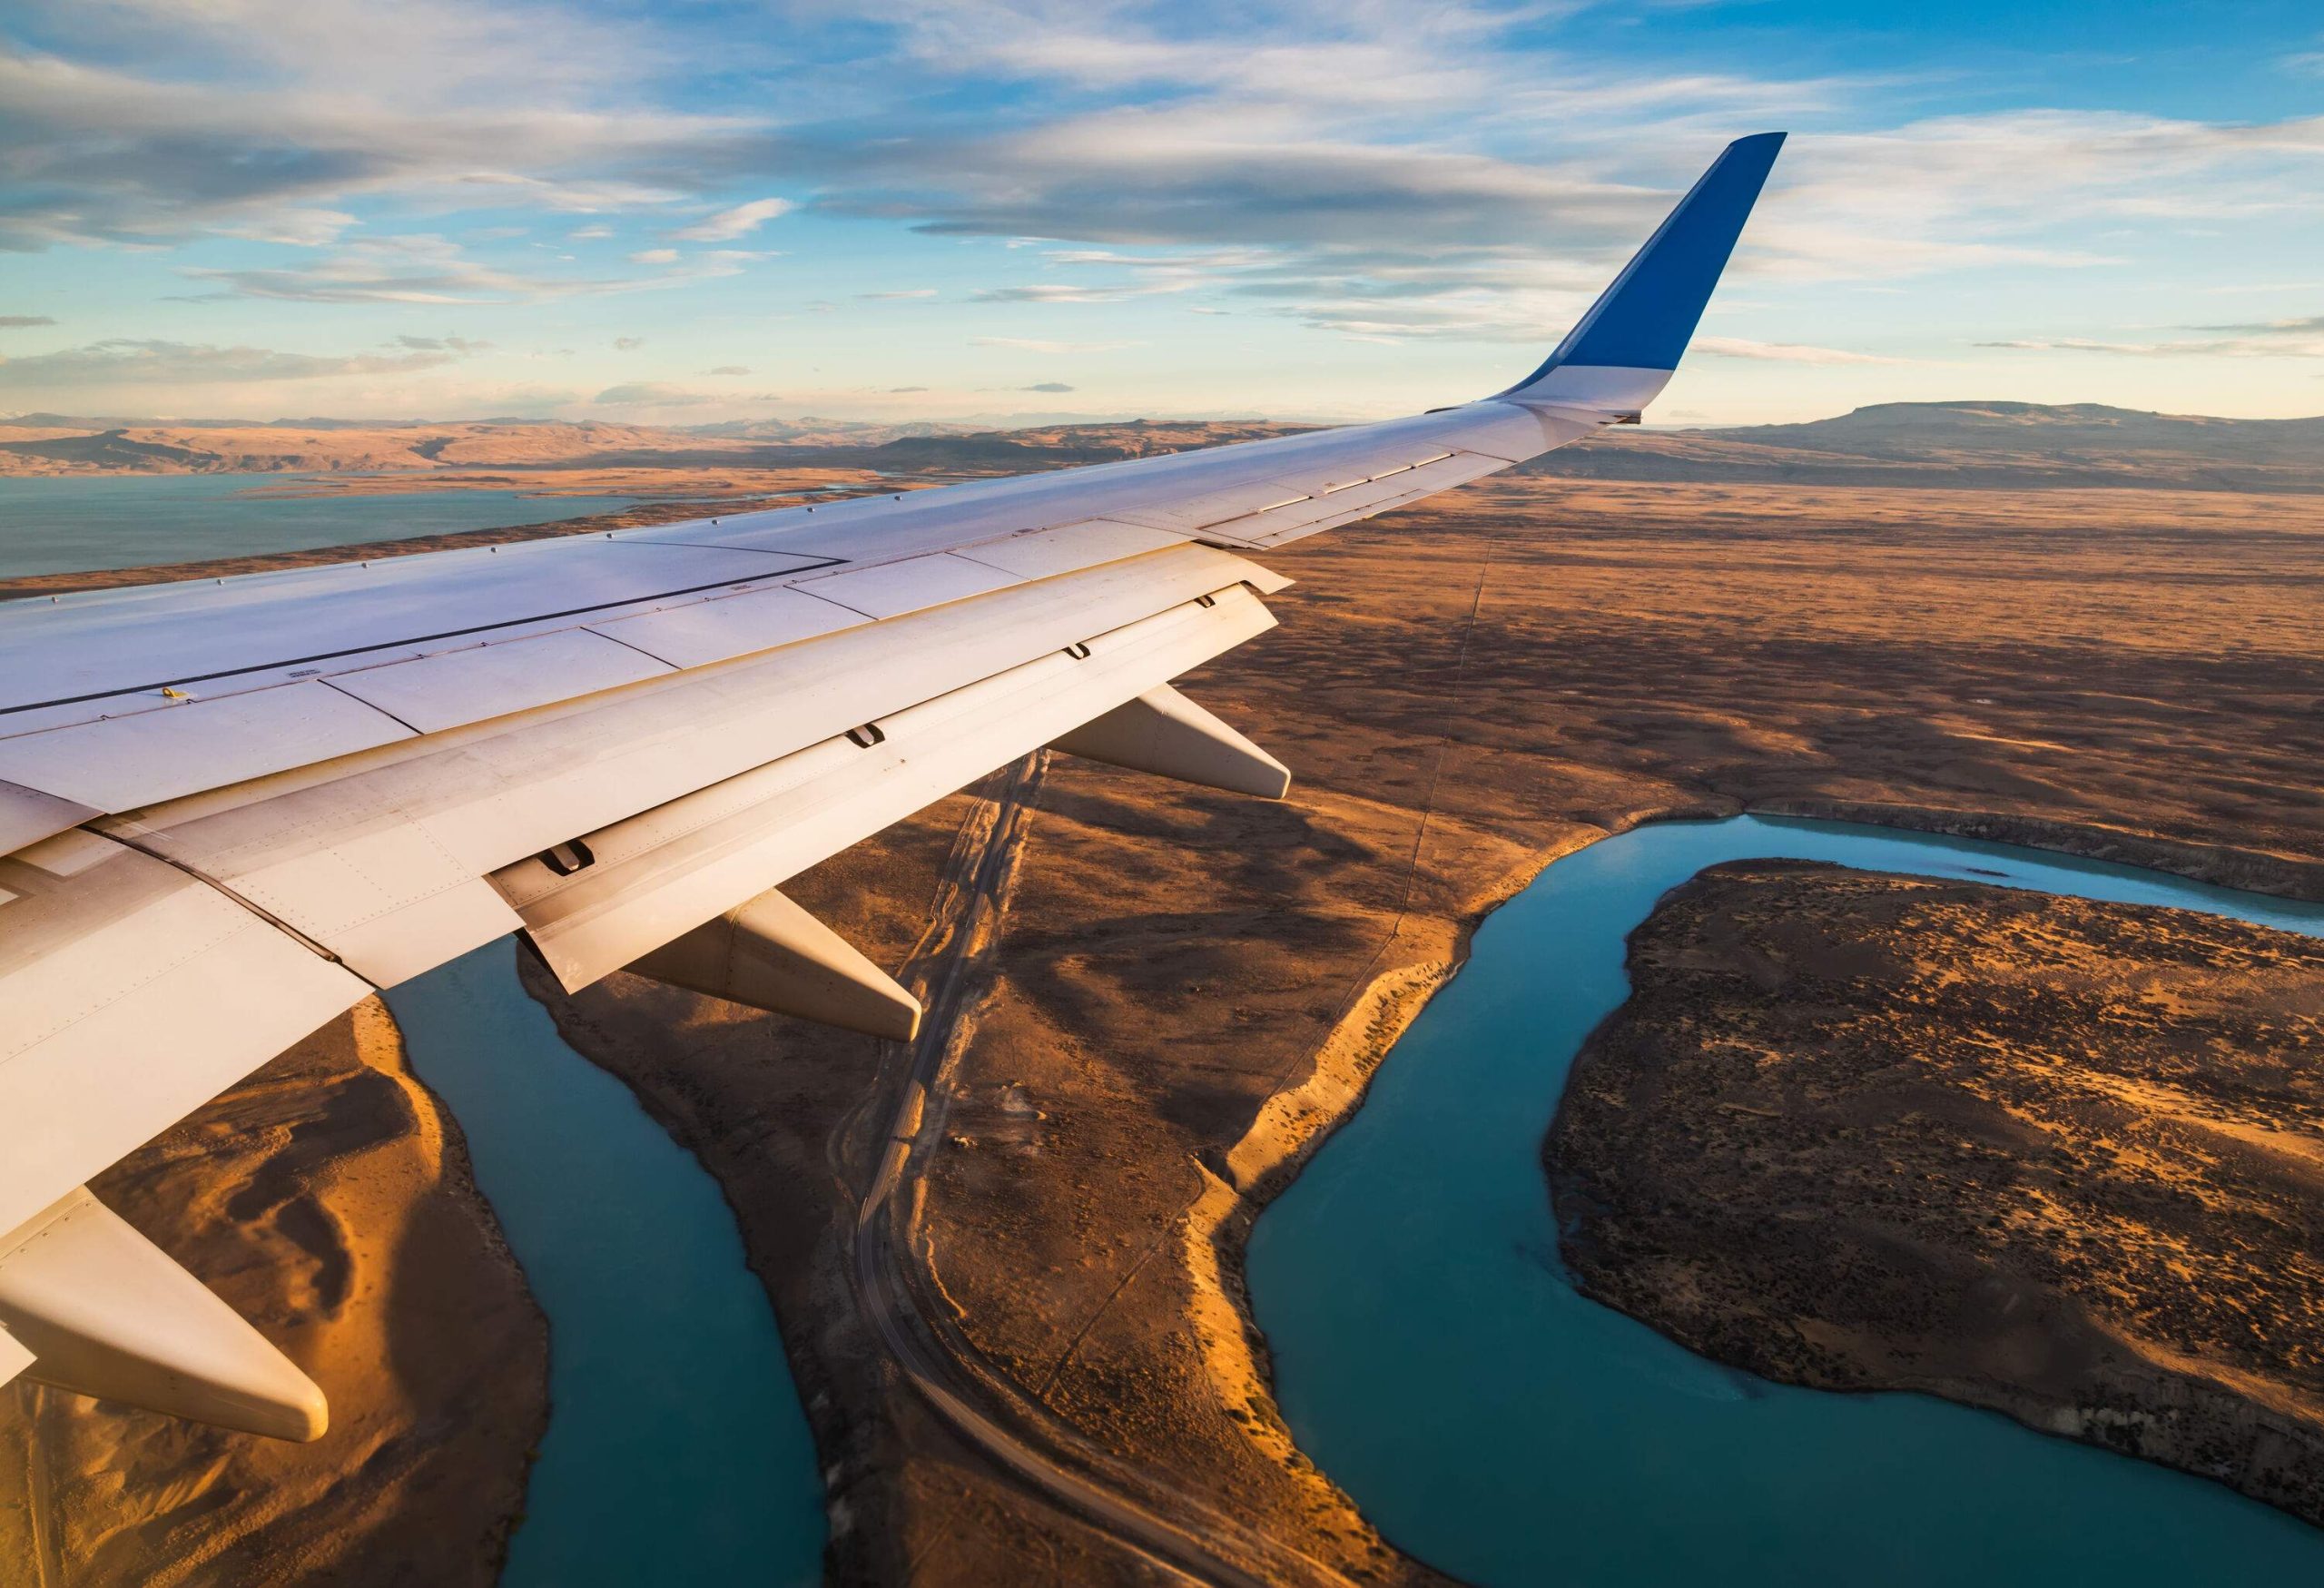 The sleek wing of a plane soars over a vast expanse of sandy terrain, with a winding river cutting through the landscape below.